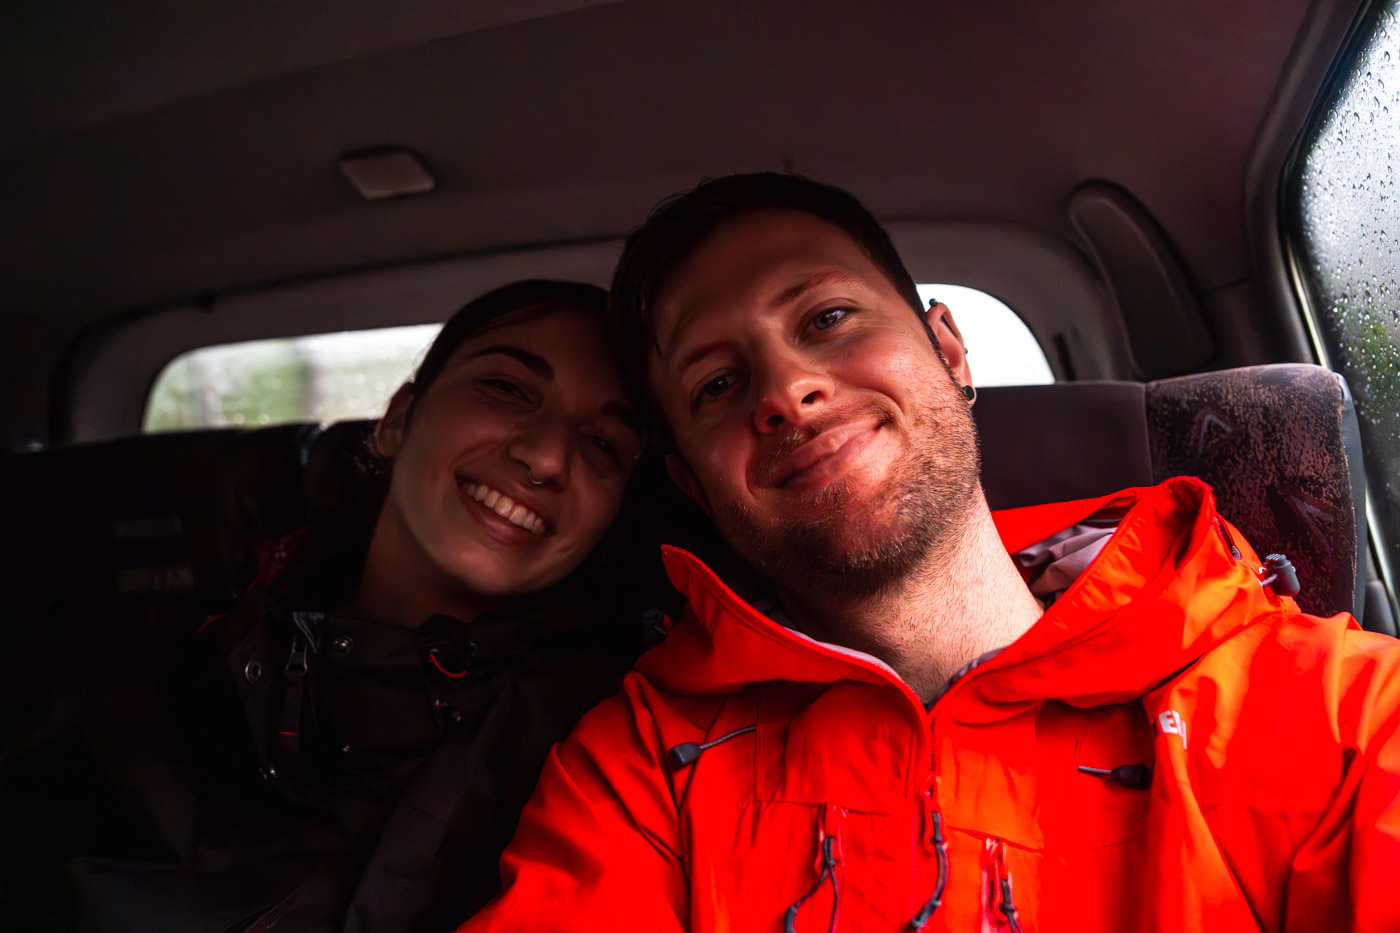 Ryan and Sara taking a selfie inside the Cootrasminca bus waiting to go back to Santa Marta.